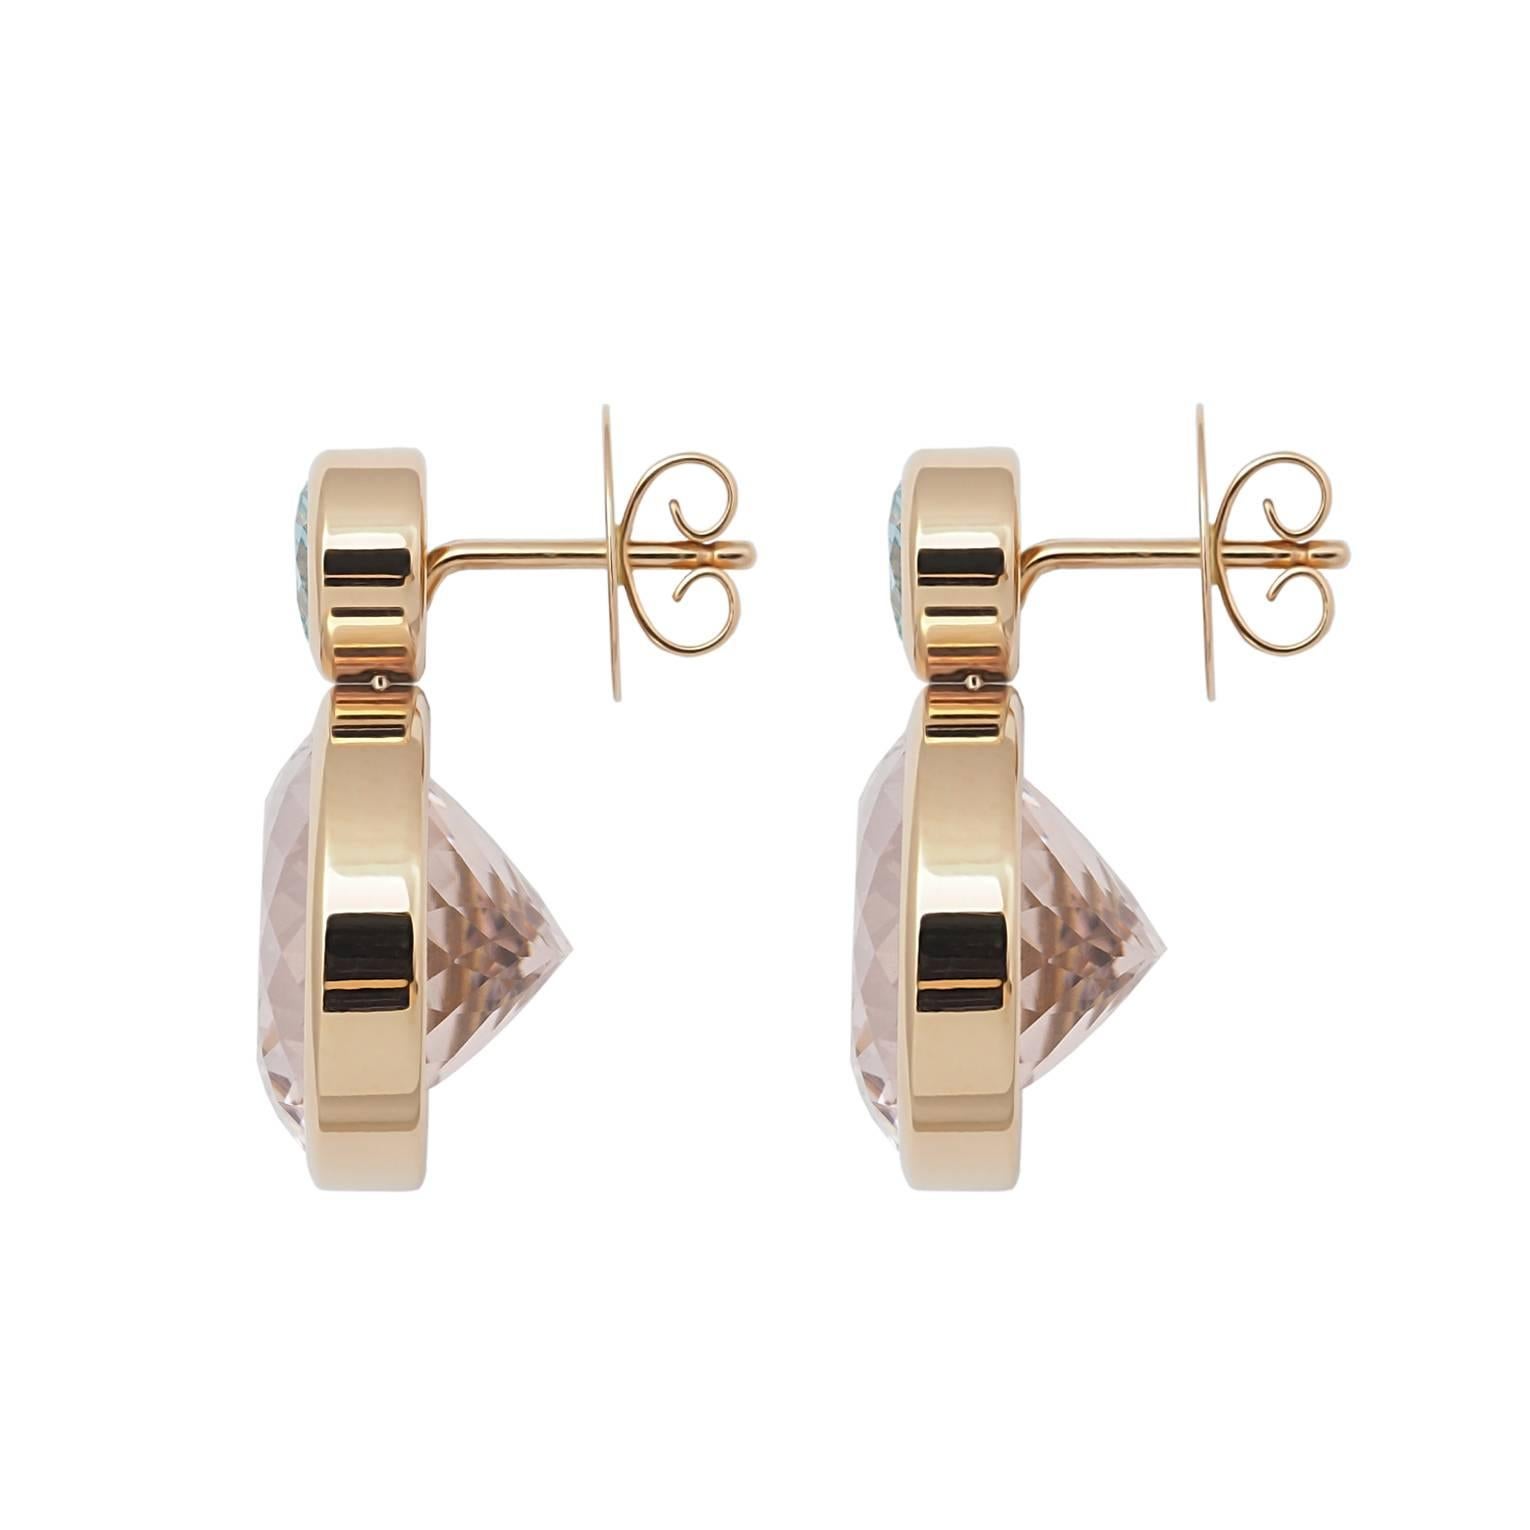 Colleen B. Rosenblat designed this classic pair of morganite (33.12 ct) and aquamarine (2.13 ct) earrings set in 18k rose gold. This earring, designed by Colleen B. Rosenblat, is perfect for daily life.